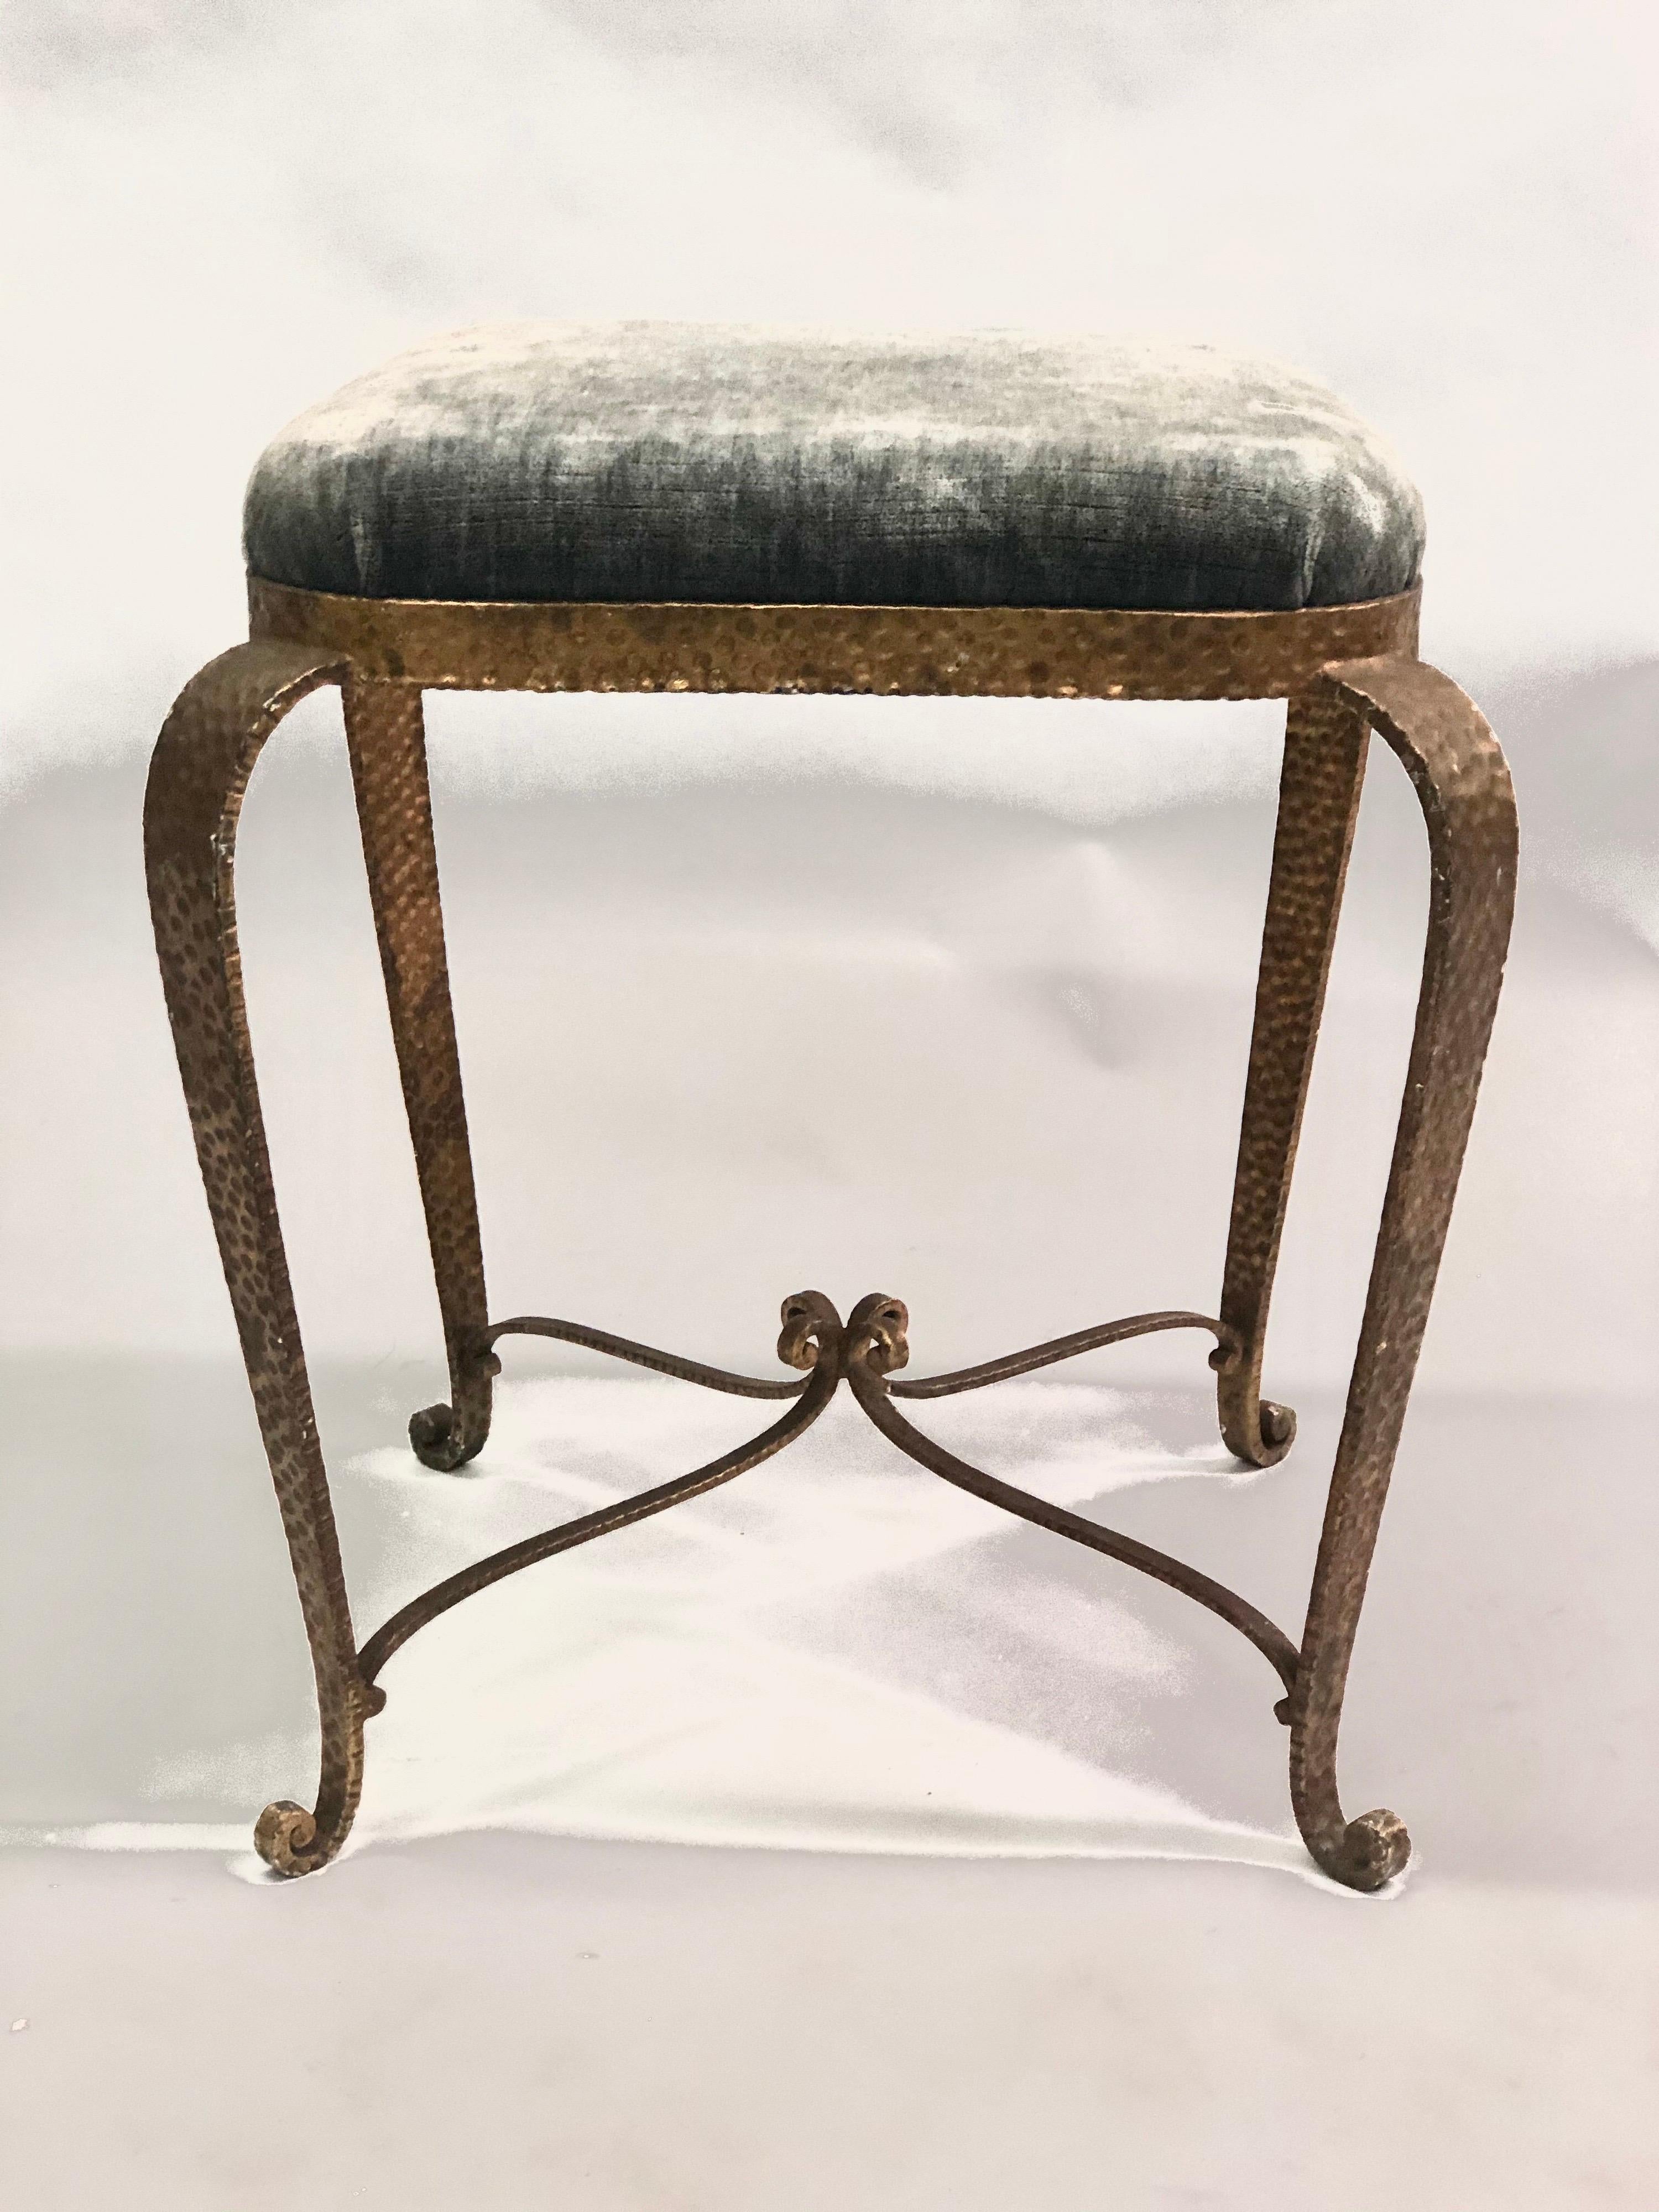 20th Century Italian Modern Neoclassical Gilt Iron Stools / Benches by Pier Luigi Colli, Pair For Sale